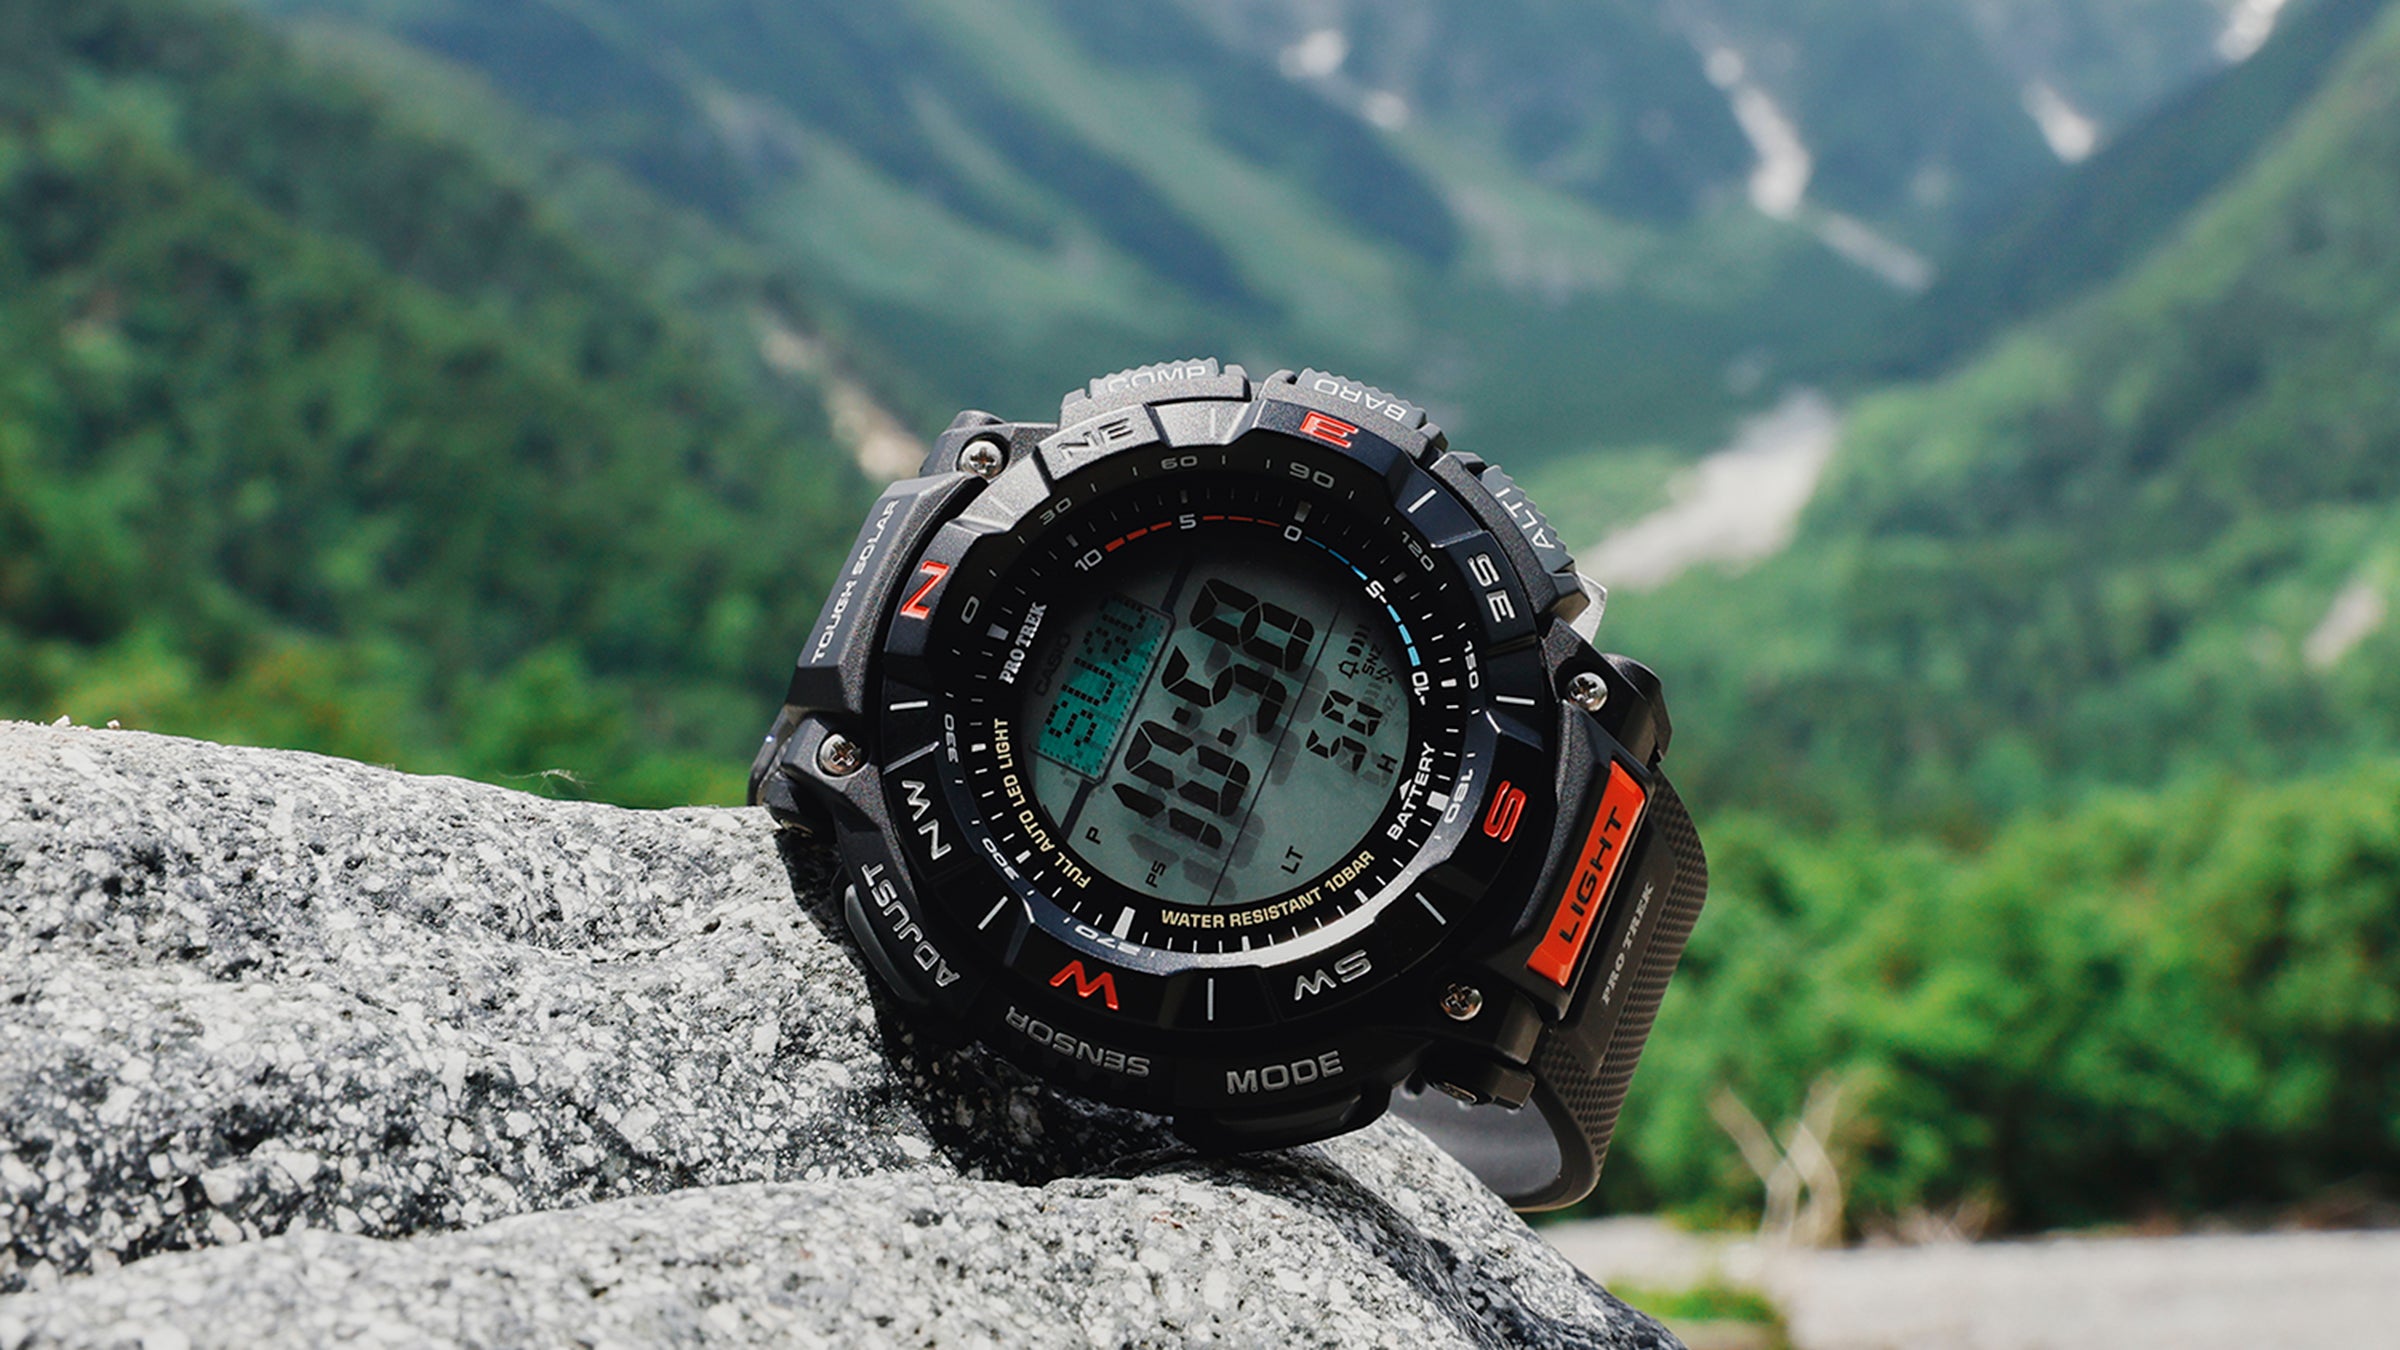 PR] Casio Introduces New PROTREK Watch with Water Resistance to 200 Meters  for Outdoor Activities in the Mountains or Ocean • Jagat Review